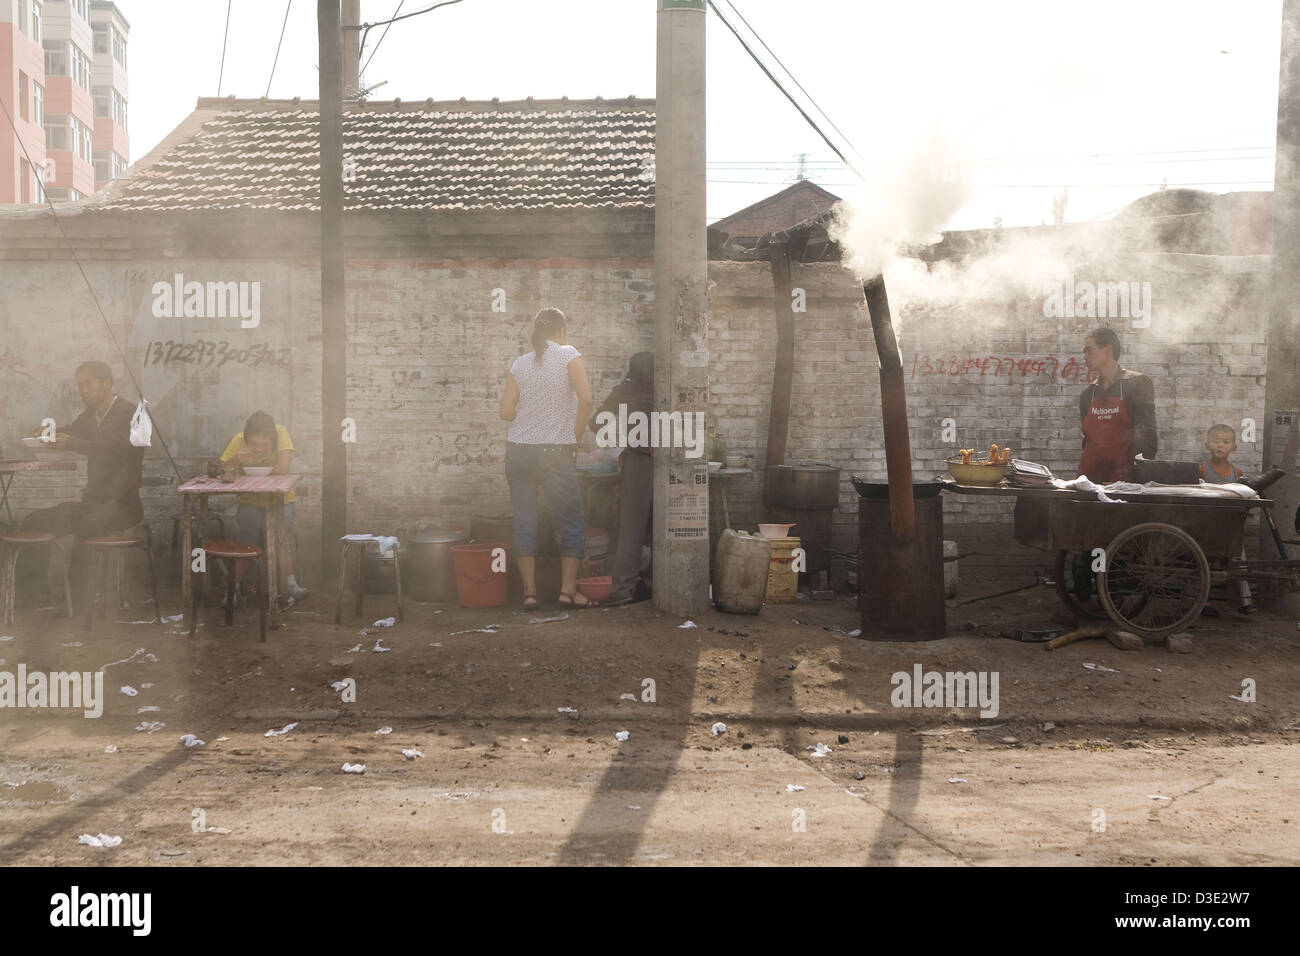 DATONG, SHANXI PROVINCE, CHINA - AUGUST 2007: Coal, and the pollution burning it makes, is everywhere. Stock Photo